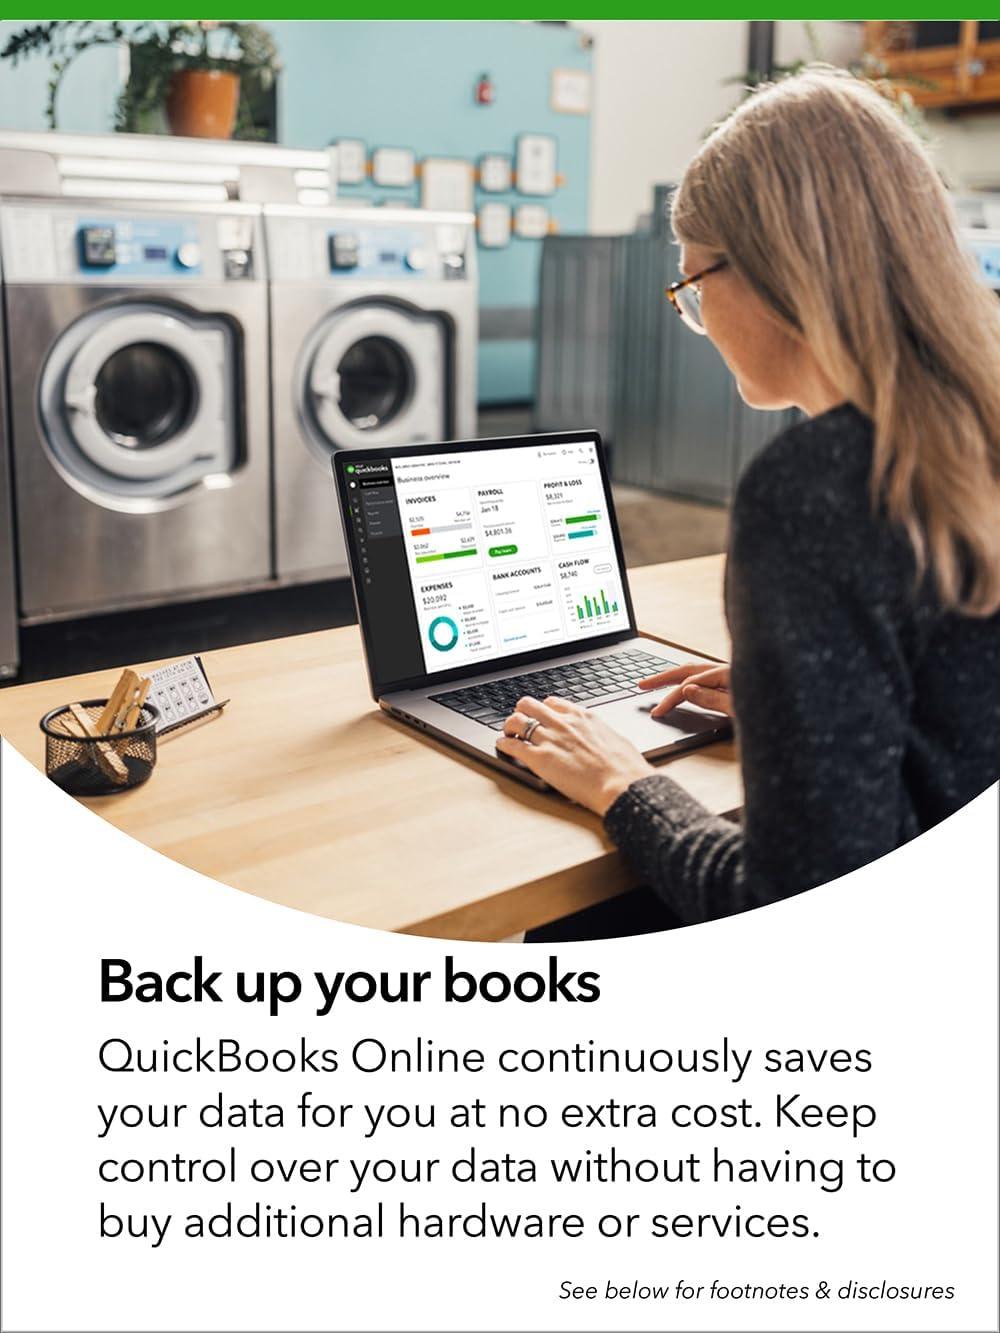 Quickbooks Online Simple Start - Instant Download for Windows and Mac (1 User) - SoftwareCW - Authorized Reseller